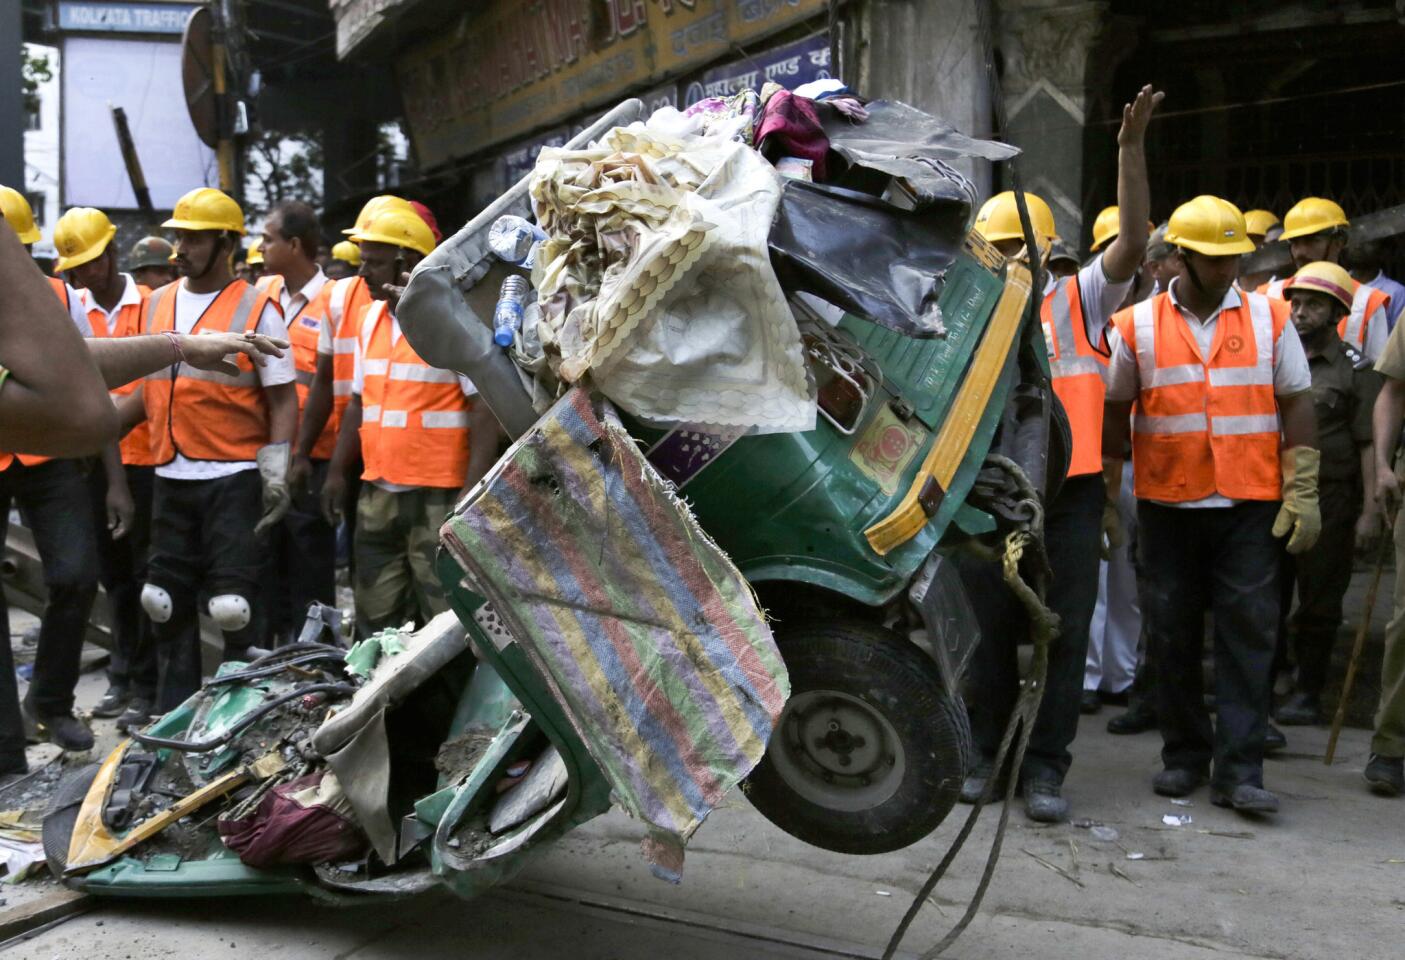 A damaged three-wheeled vehicle is taken out from the rubble of a collapsed overpass in Kolkata, India, on Arpil 1.